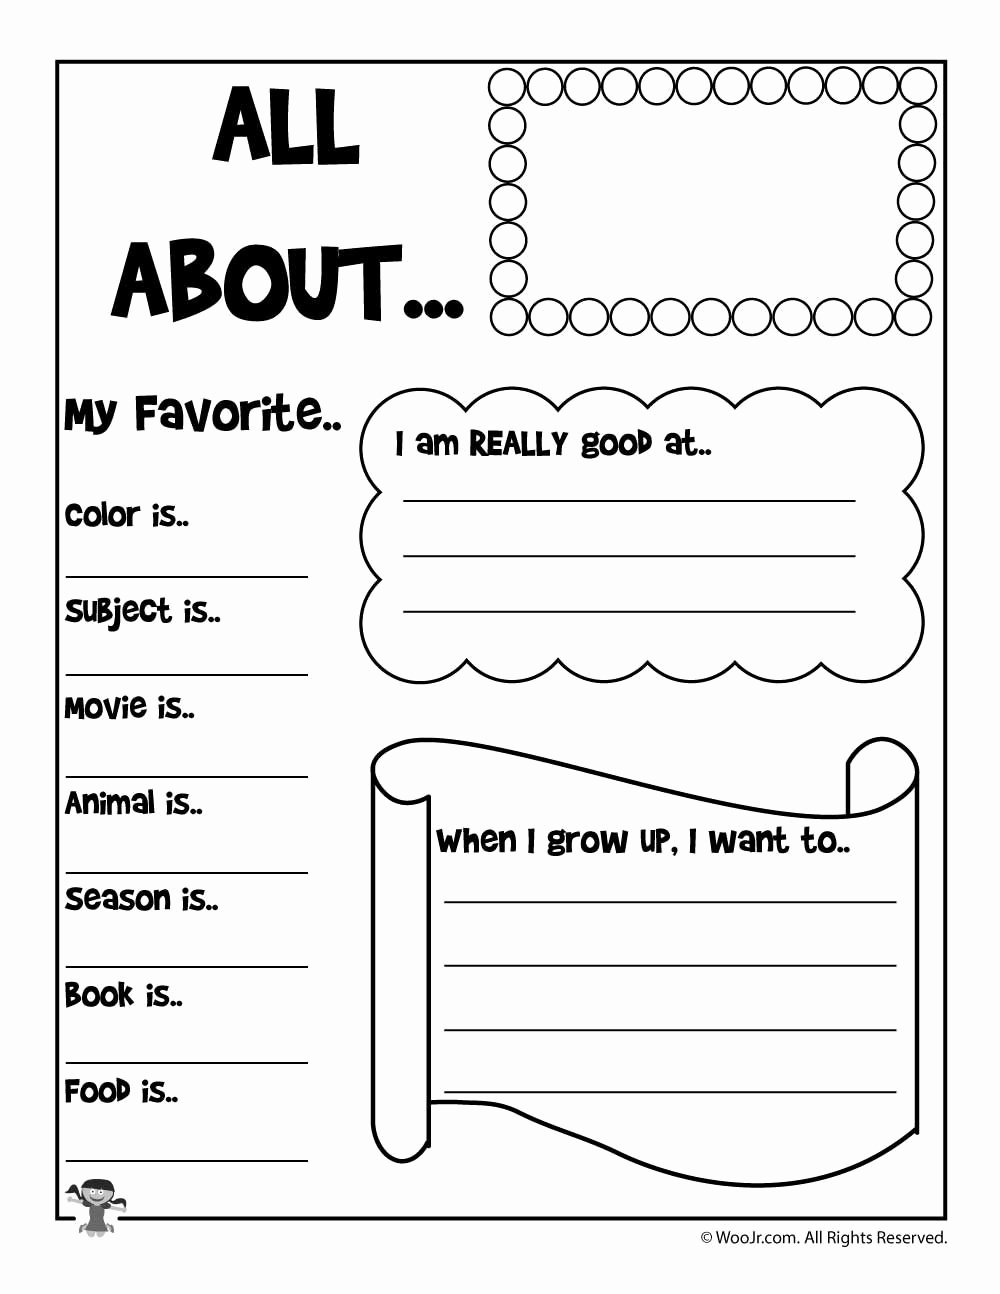 All About Me Printable Worksheet Awesome Printable About Me Worksheets Printables for Kids